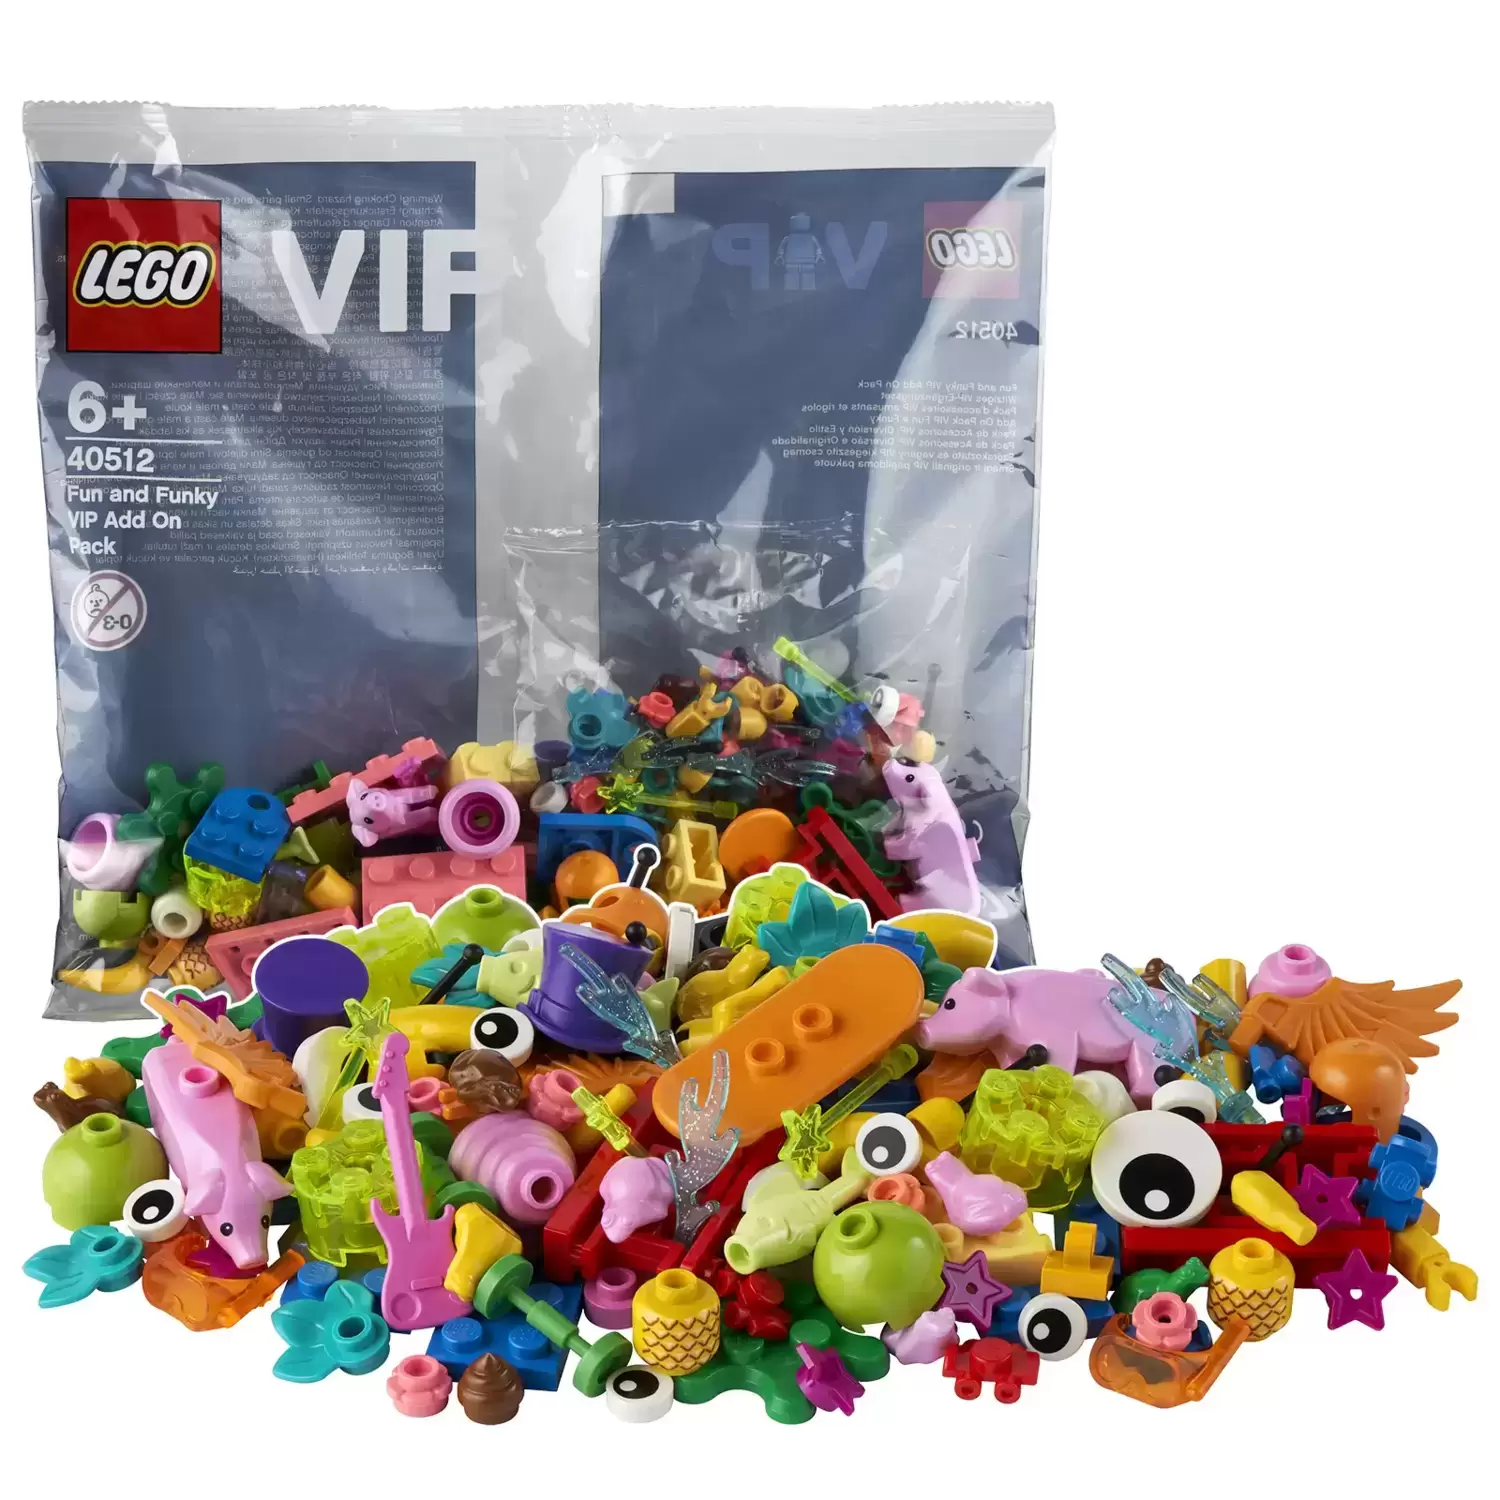 LEGO Saisonnier - Fun and Funky VIP Add On Pack